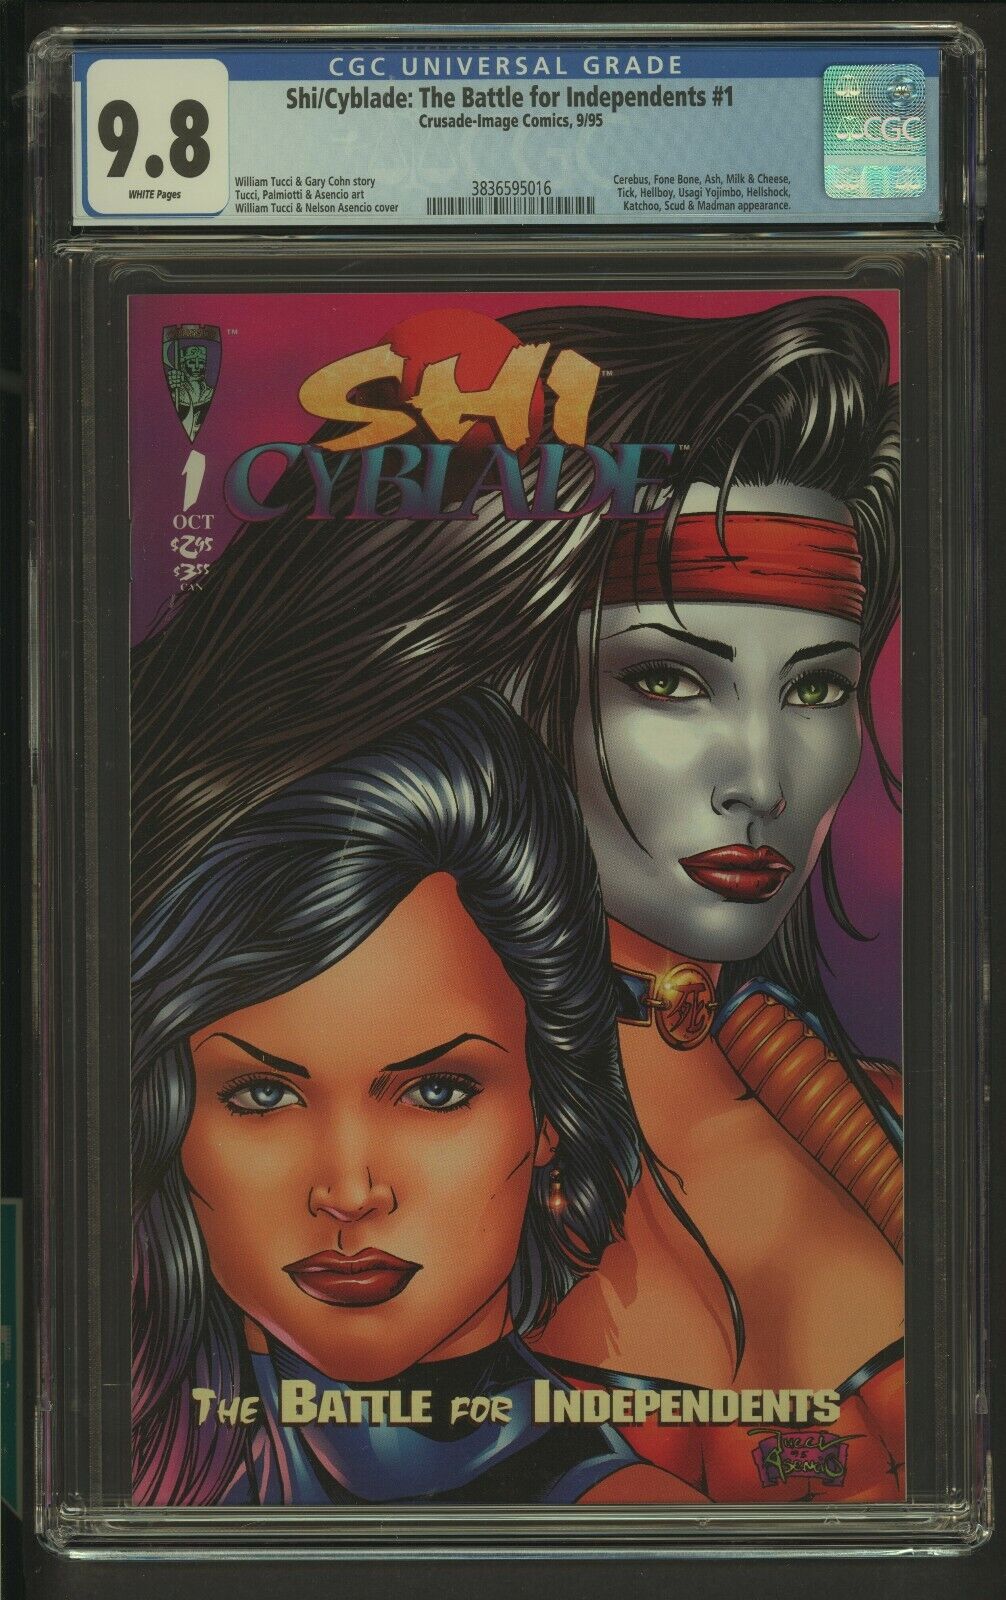 SHI/CYBLADE THE BATTLE FOR INDEPENDENTS 1 CGC 9.8 9/95 W.TUCCI & G.COHN STORY